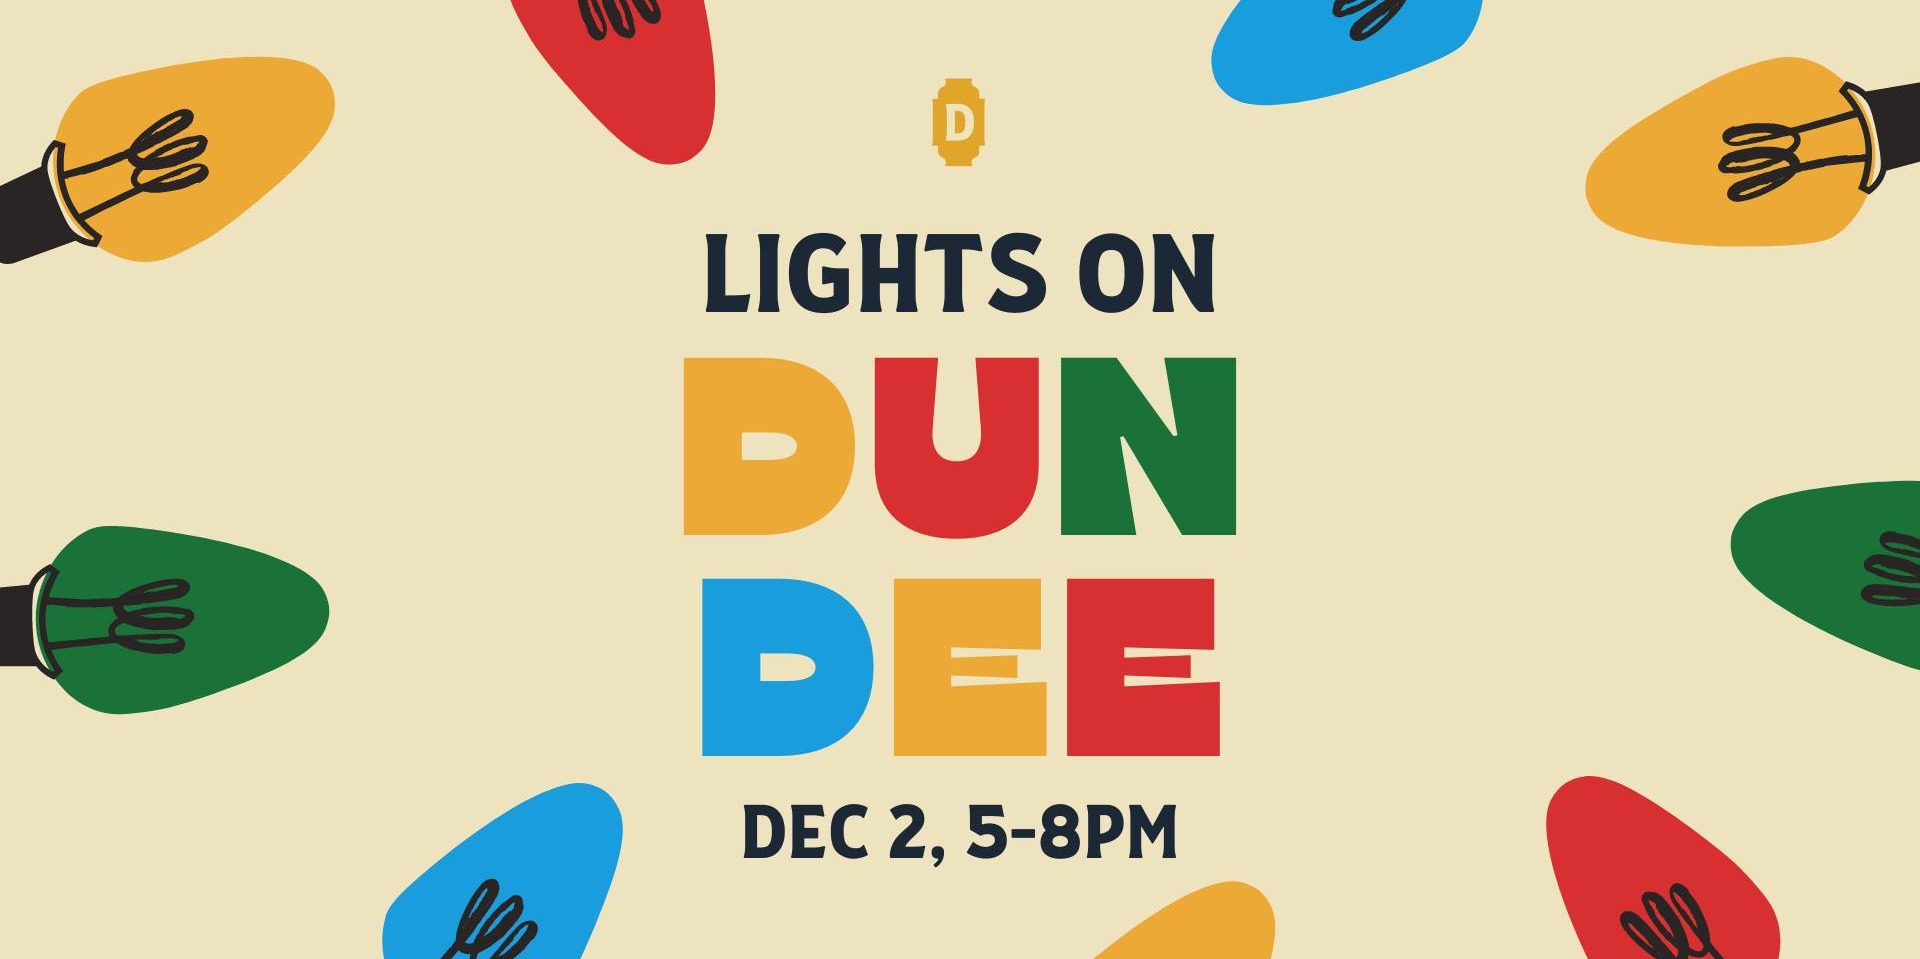 Lights on Dundee promotional image